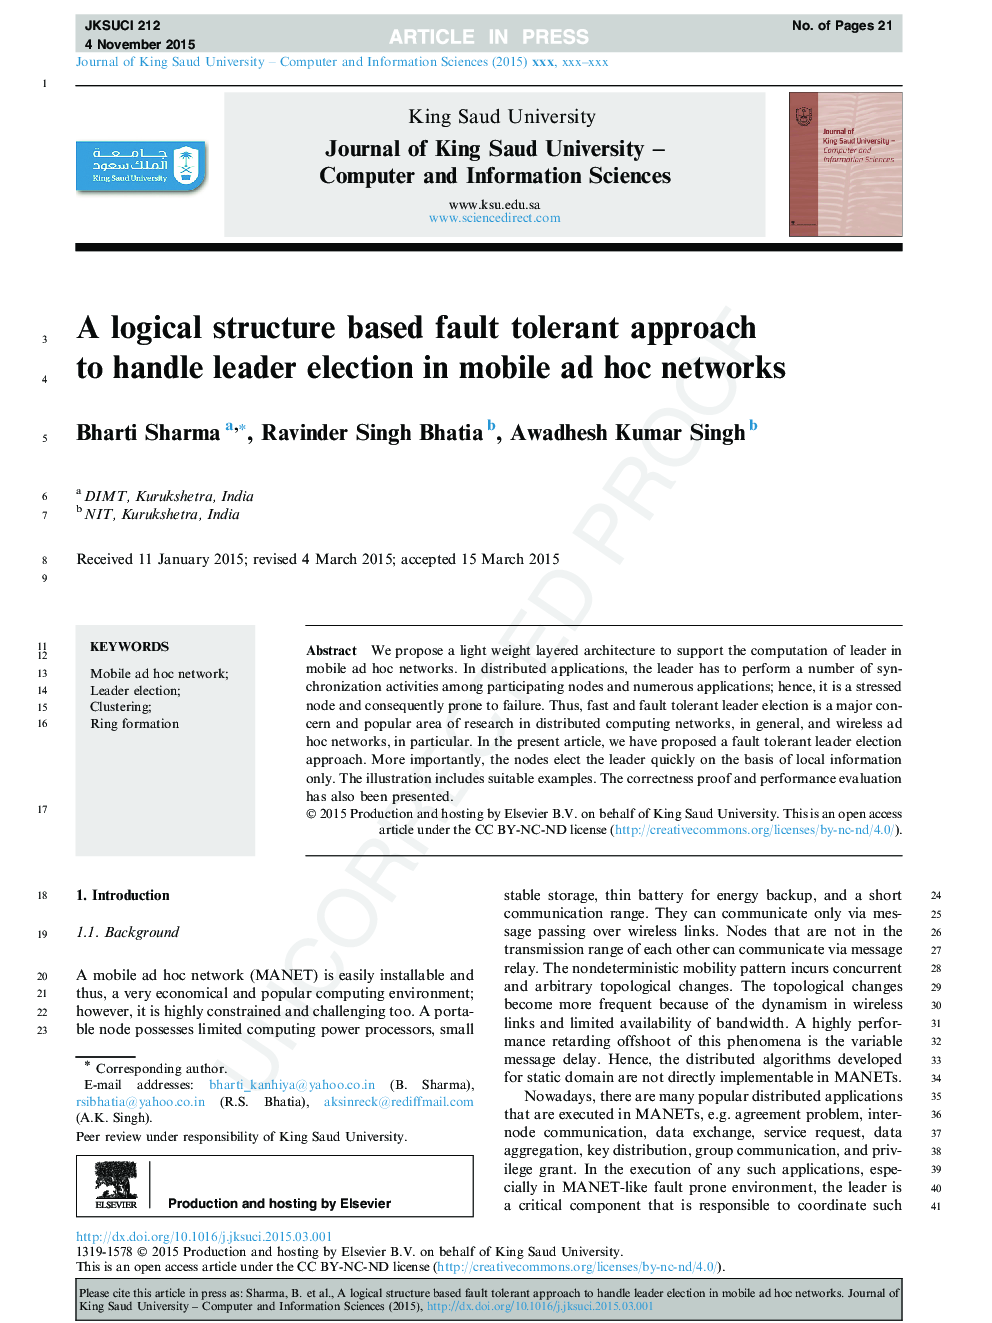 A logical structure based fault tolerant approach to handle leader election in mobile ad hoc networks